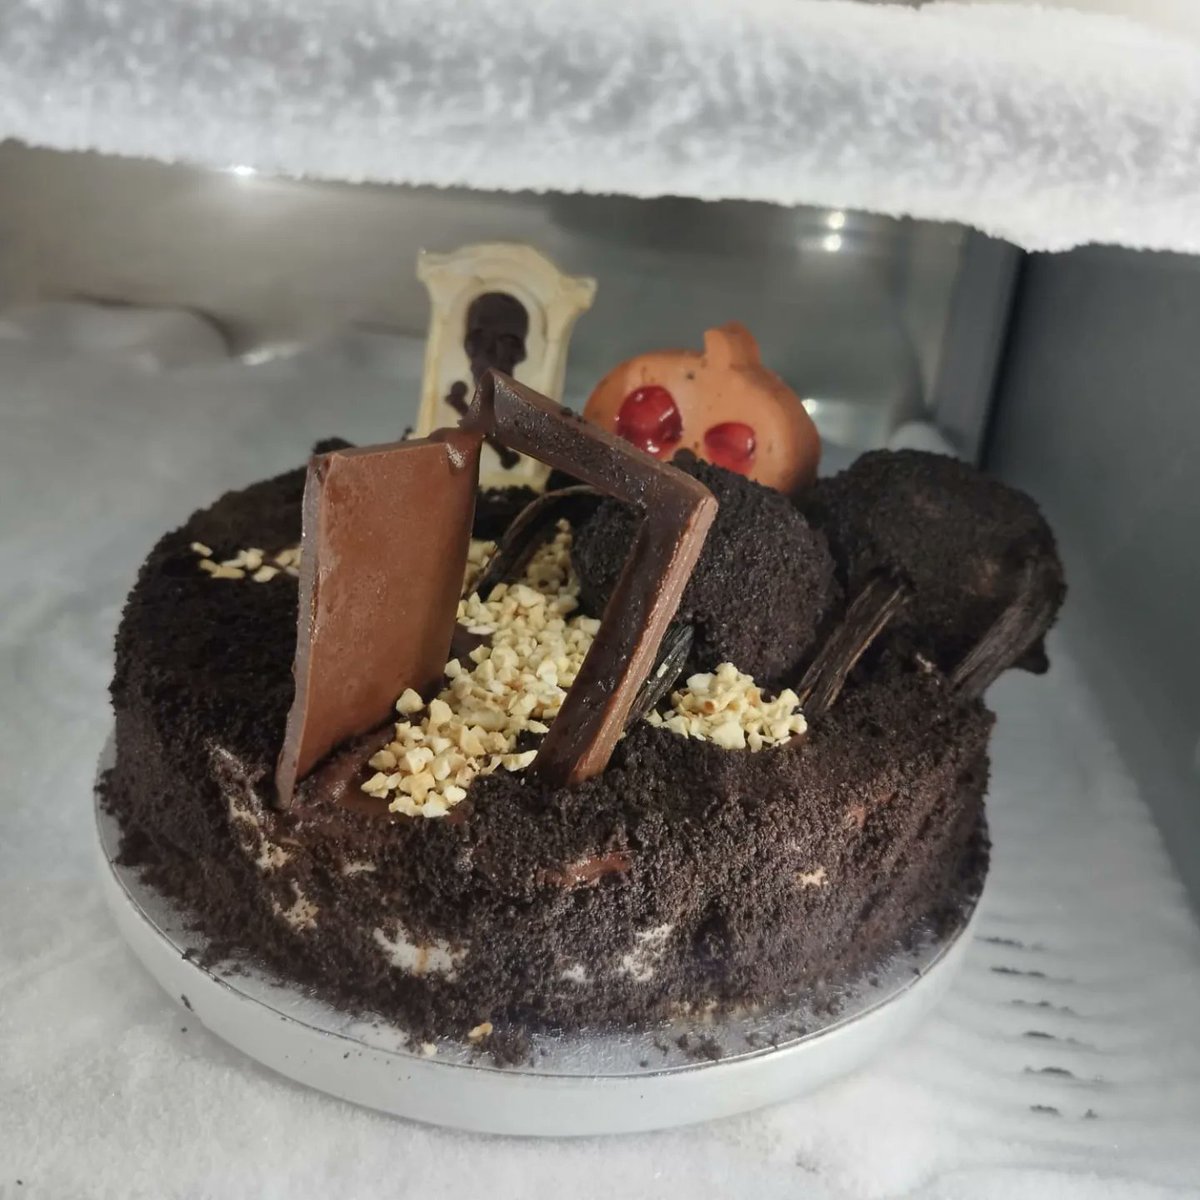 I spotted this wonderful Halloween cemetery gelato cake in Panunzio's Kitchen today. Spooky and delicious!

@panunzio_s

#panunzioskitchen #gelatoitaliano #gelato #gelatocake #halloween #cemetery #icecream #gelatolovers #bristol #foodporn #foodphotography #food #desserts